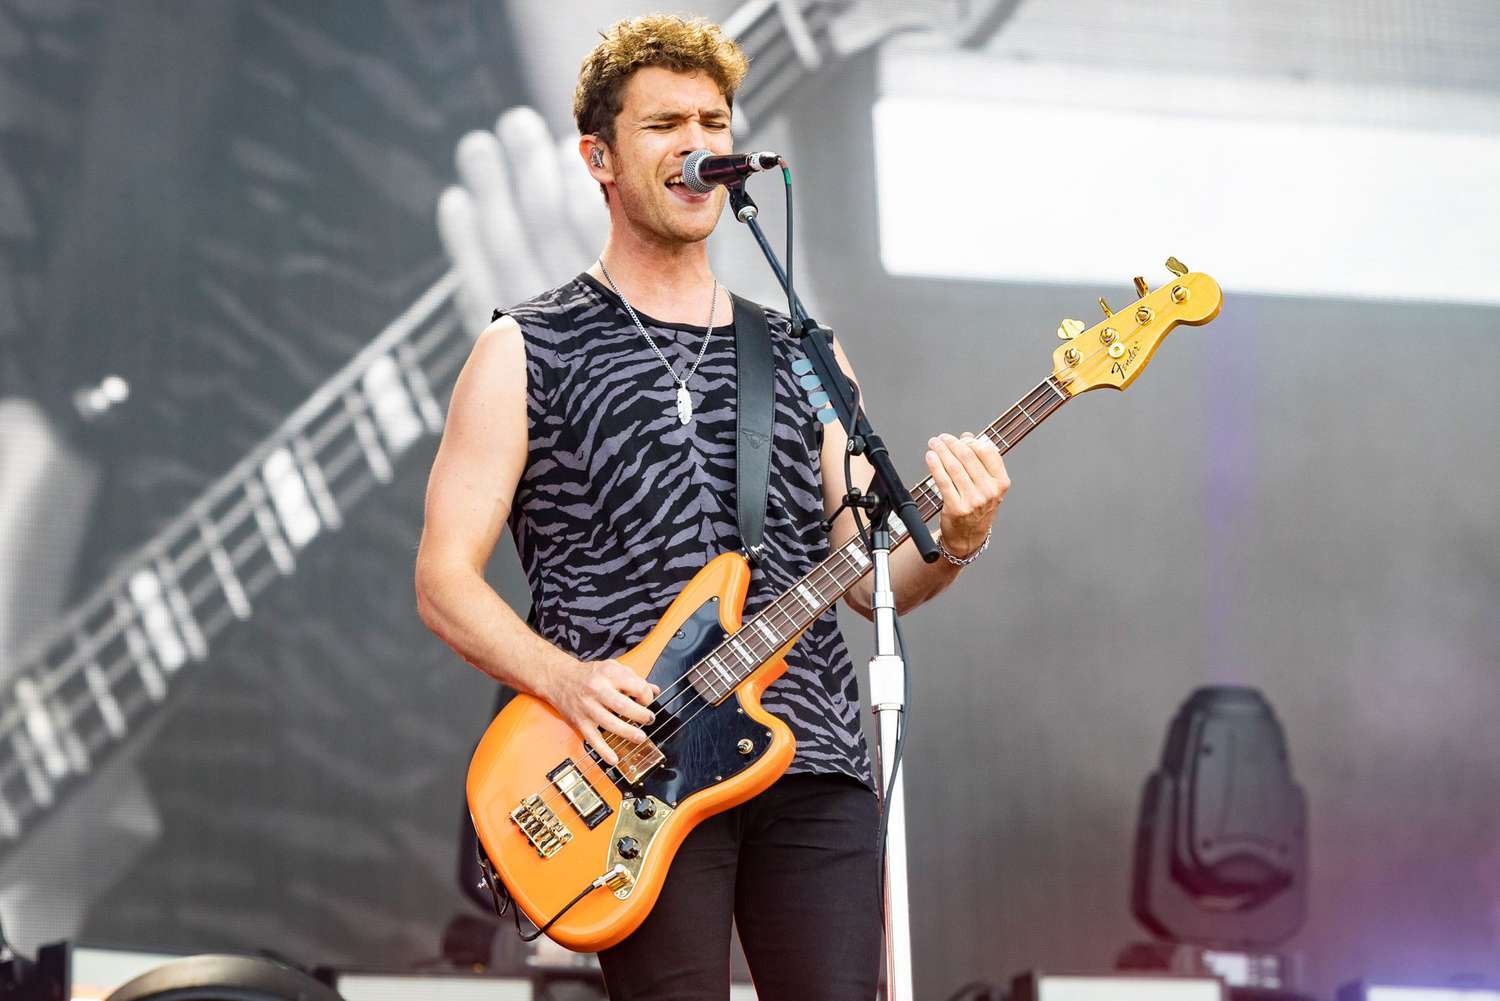 Royal Blood flips off crowd, storms off stage at music festival